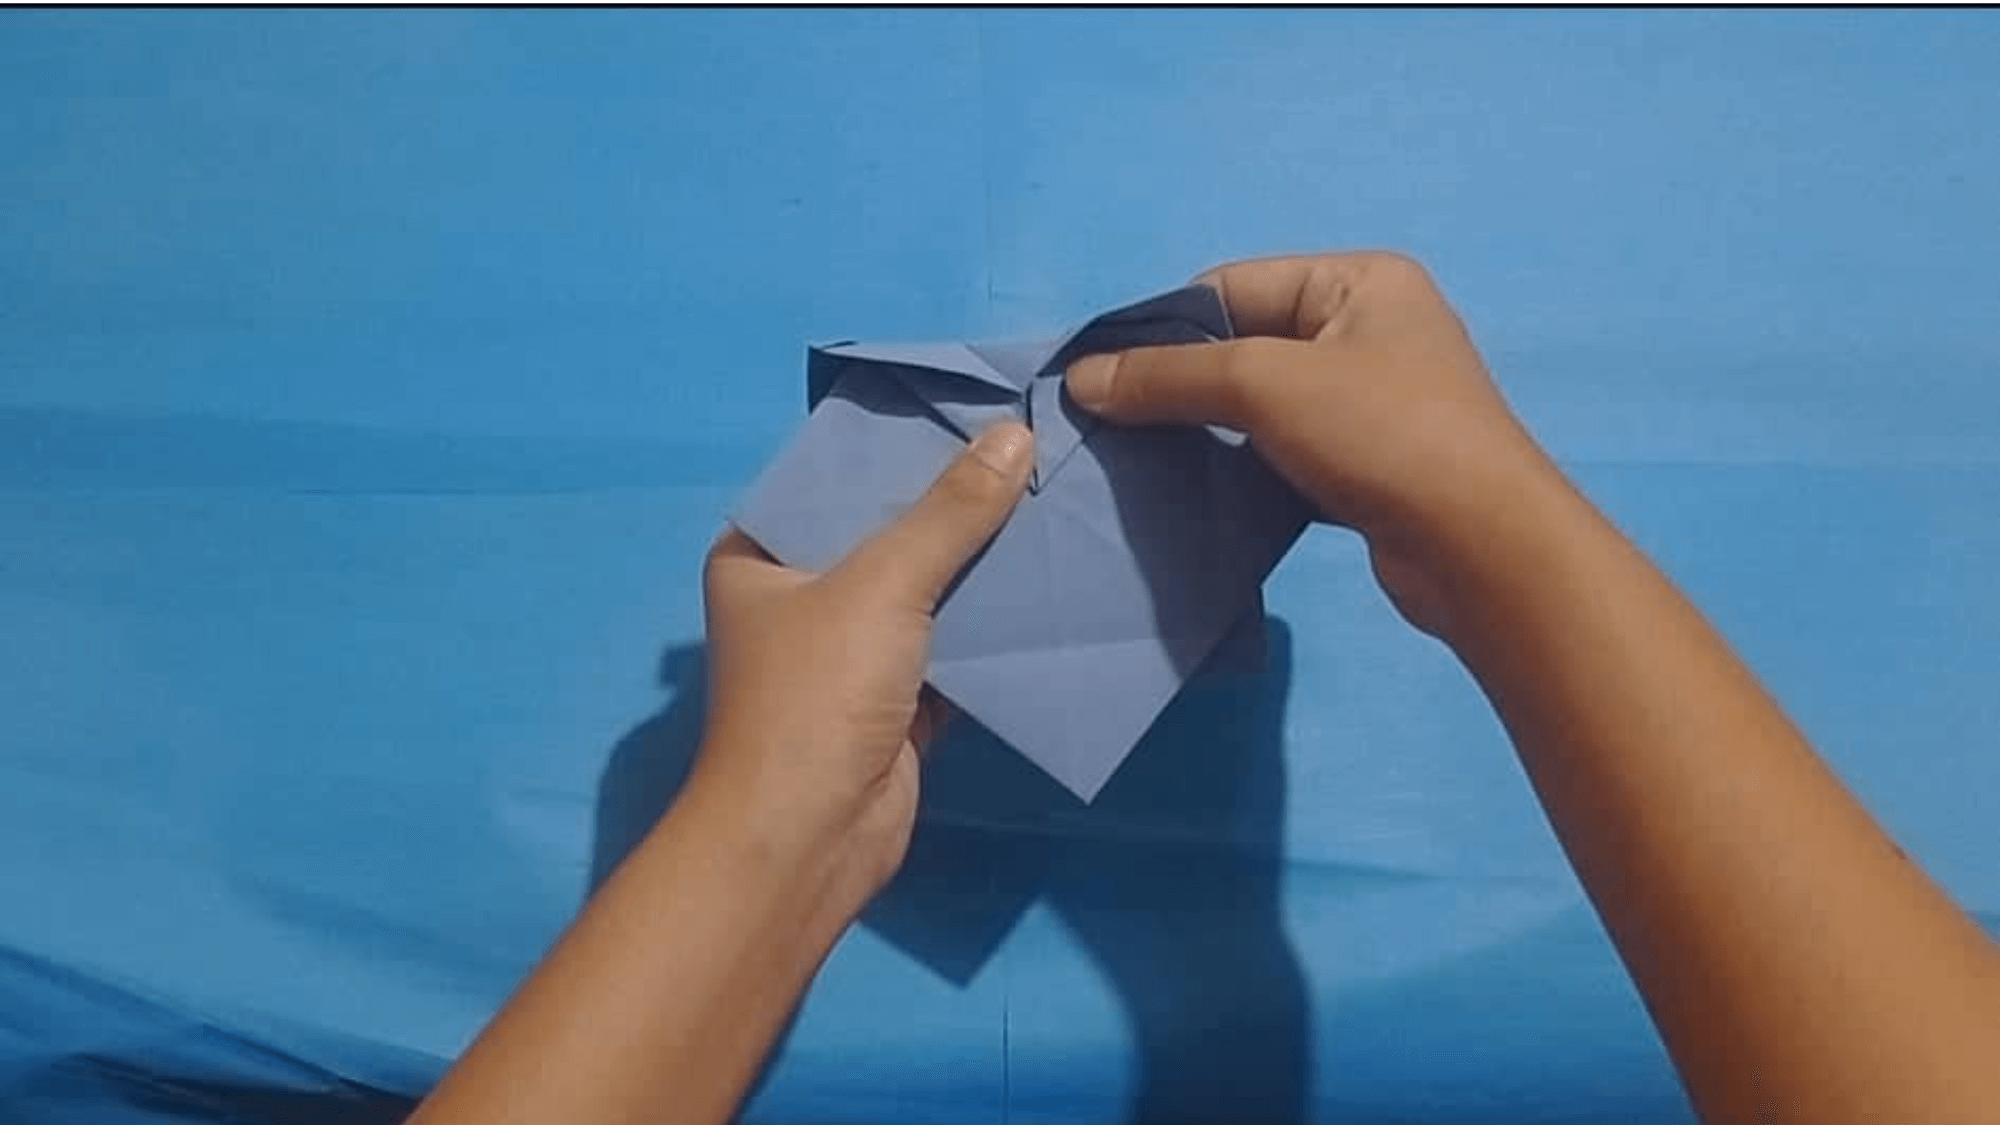 origami lotus flower instructions step 11